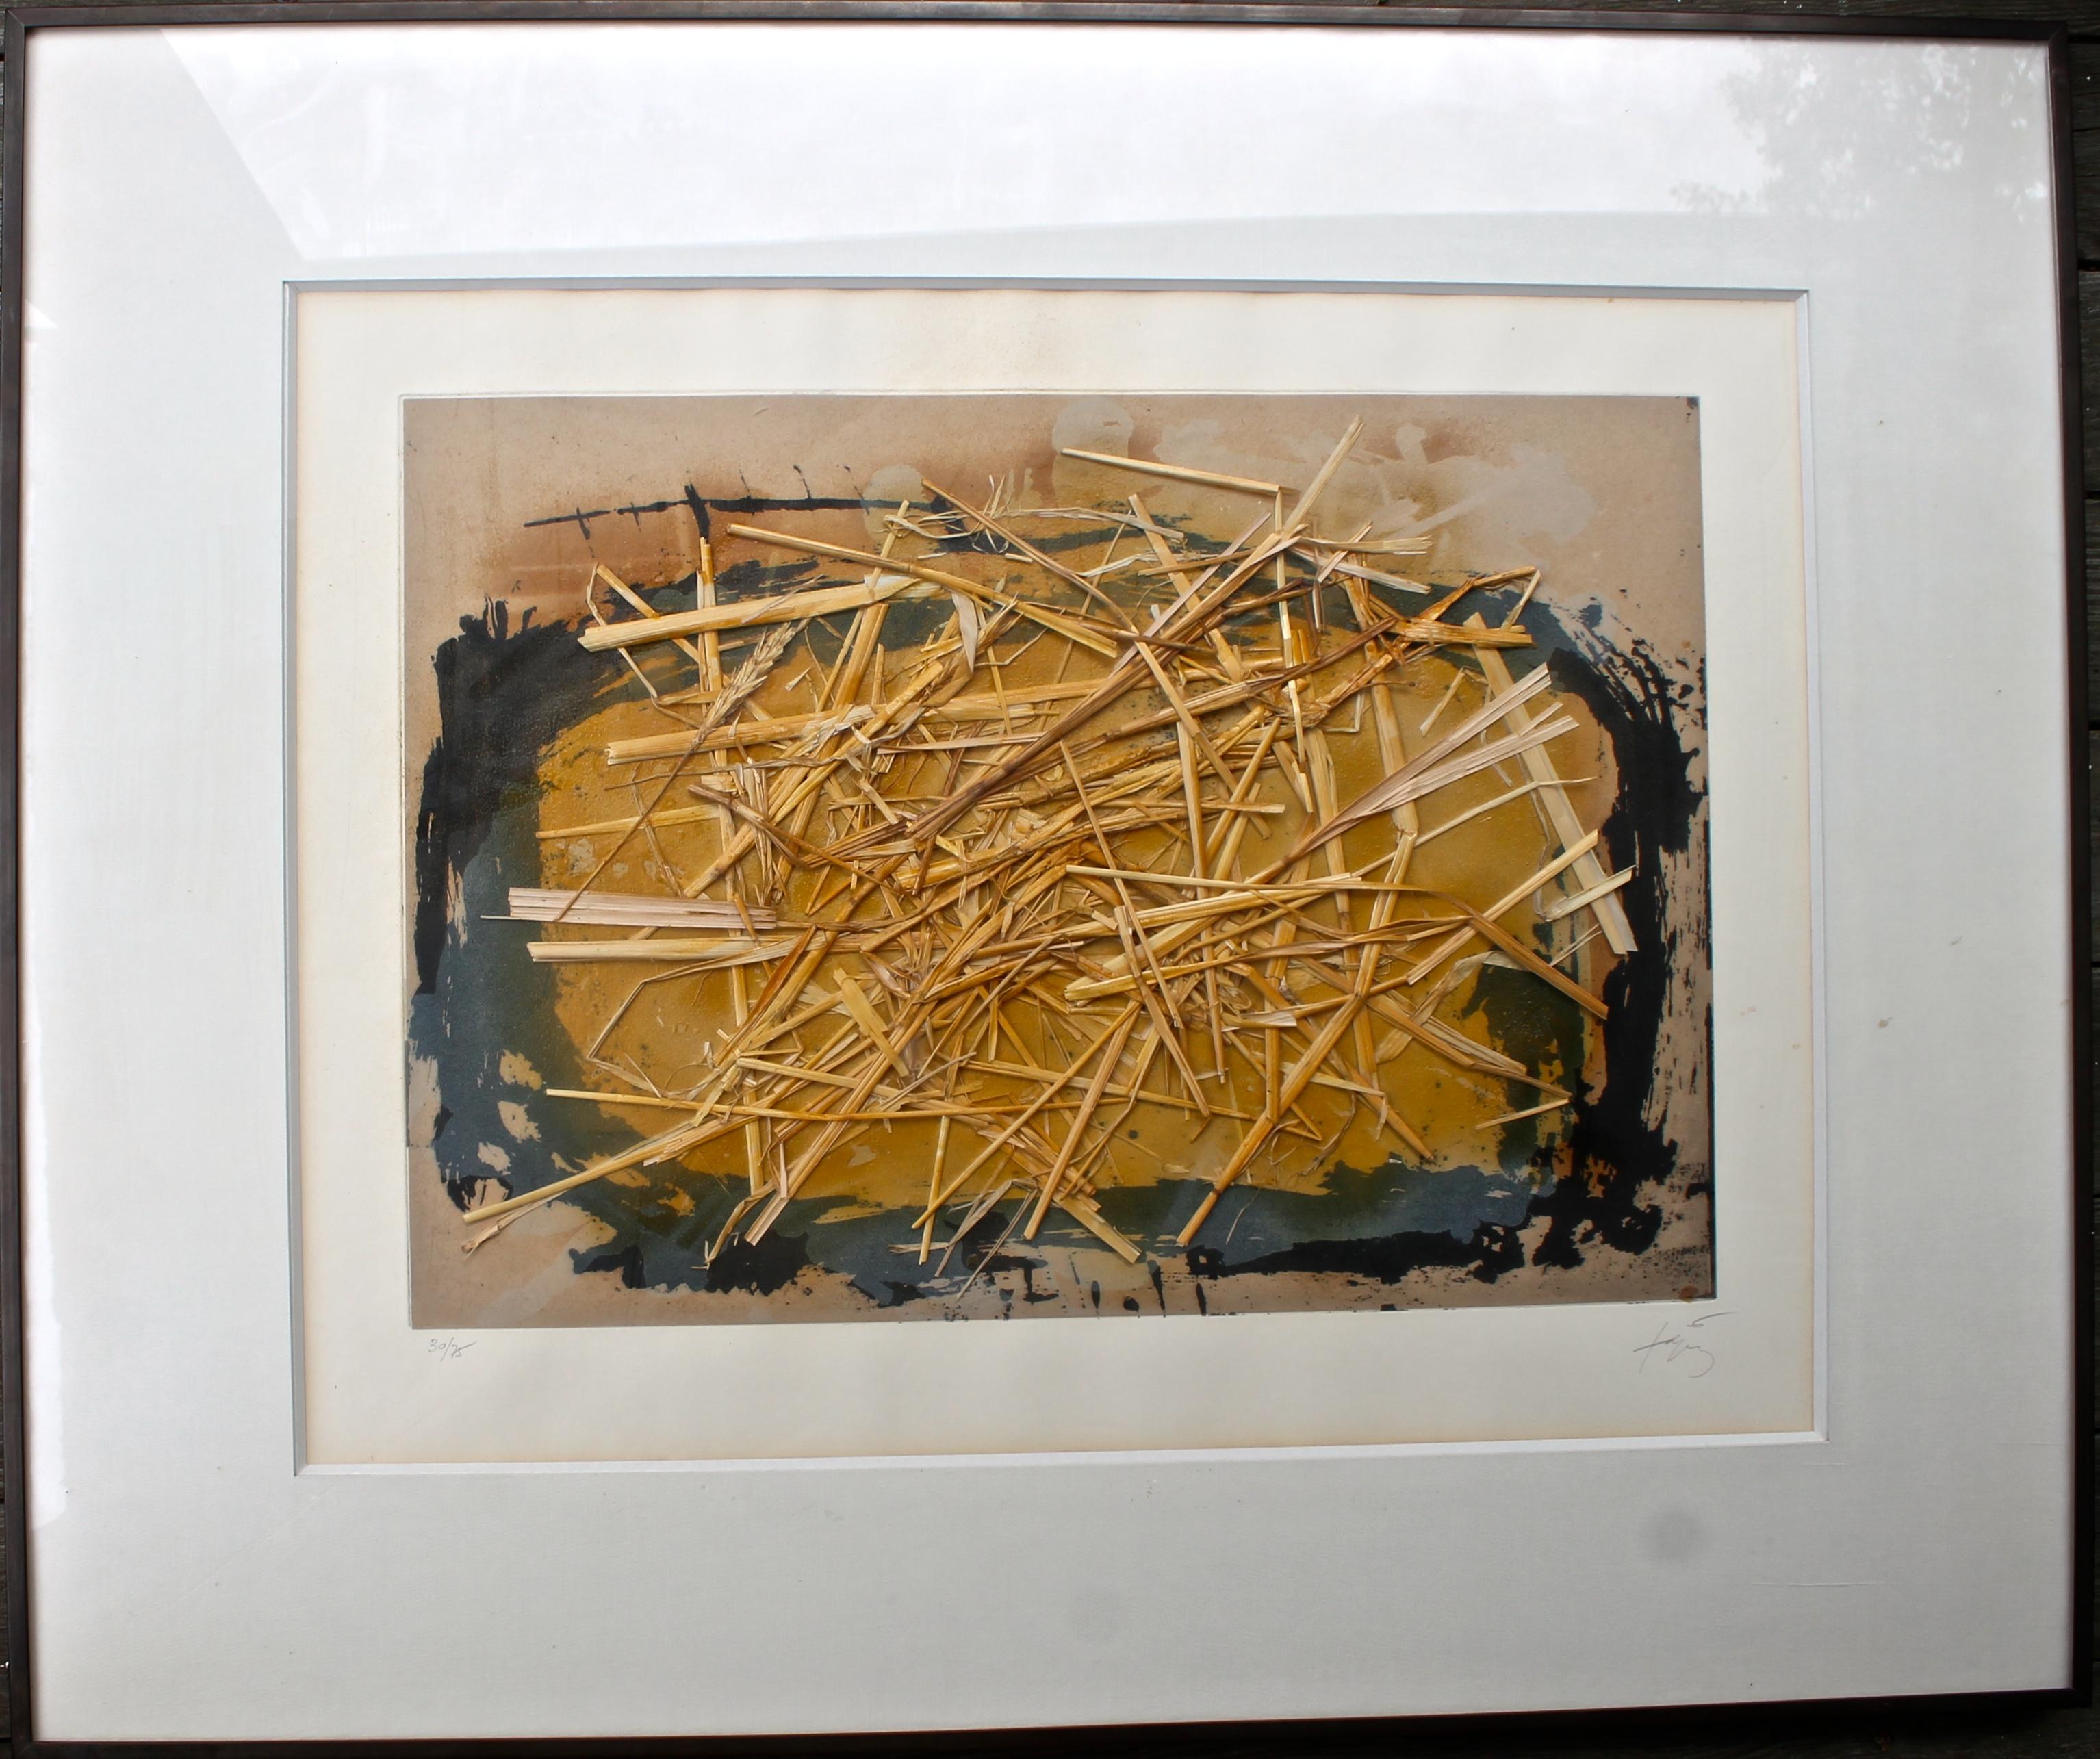 Offering a beautifully matted and framed Etching Aquatint with a unique straw collage by the super important Spanish painter Antoni Tapies (1923-2012). Galfetti Catalog Raisonnee #196. This is signed and numbered in pencil 30/75. Image size: 13 1/2